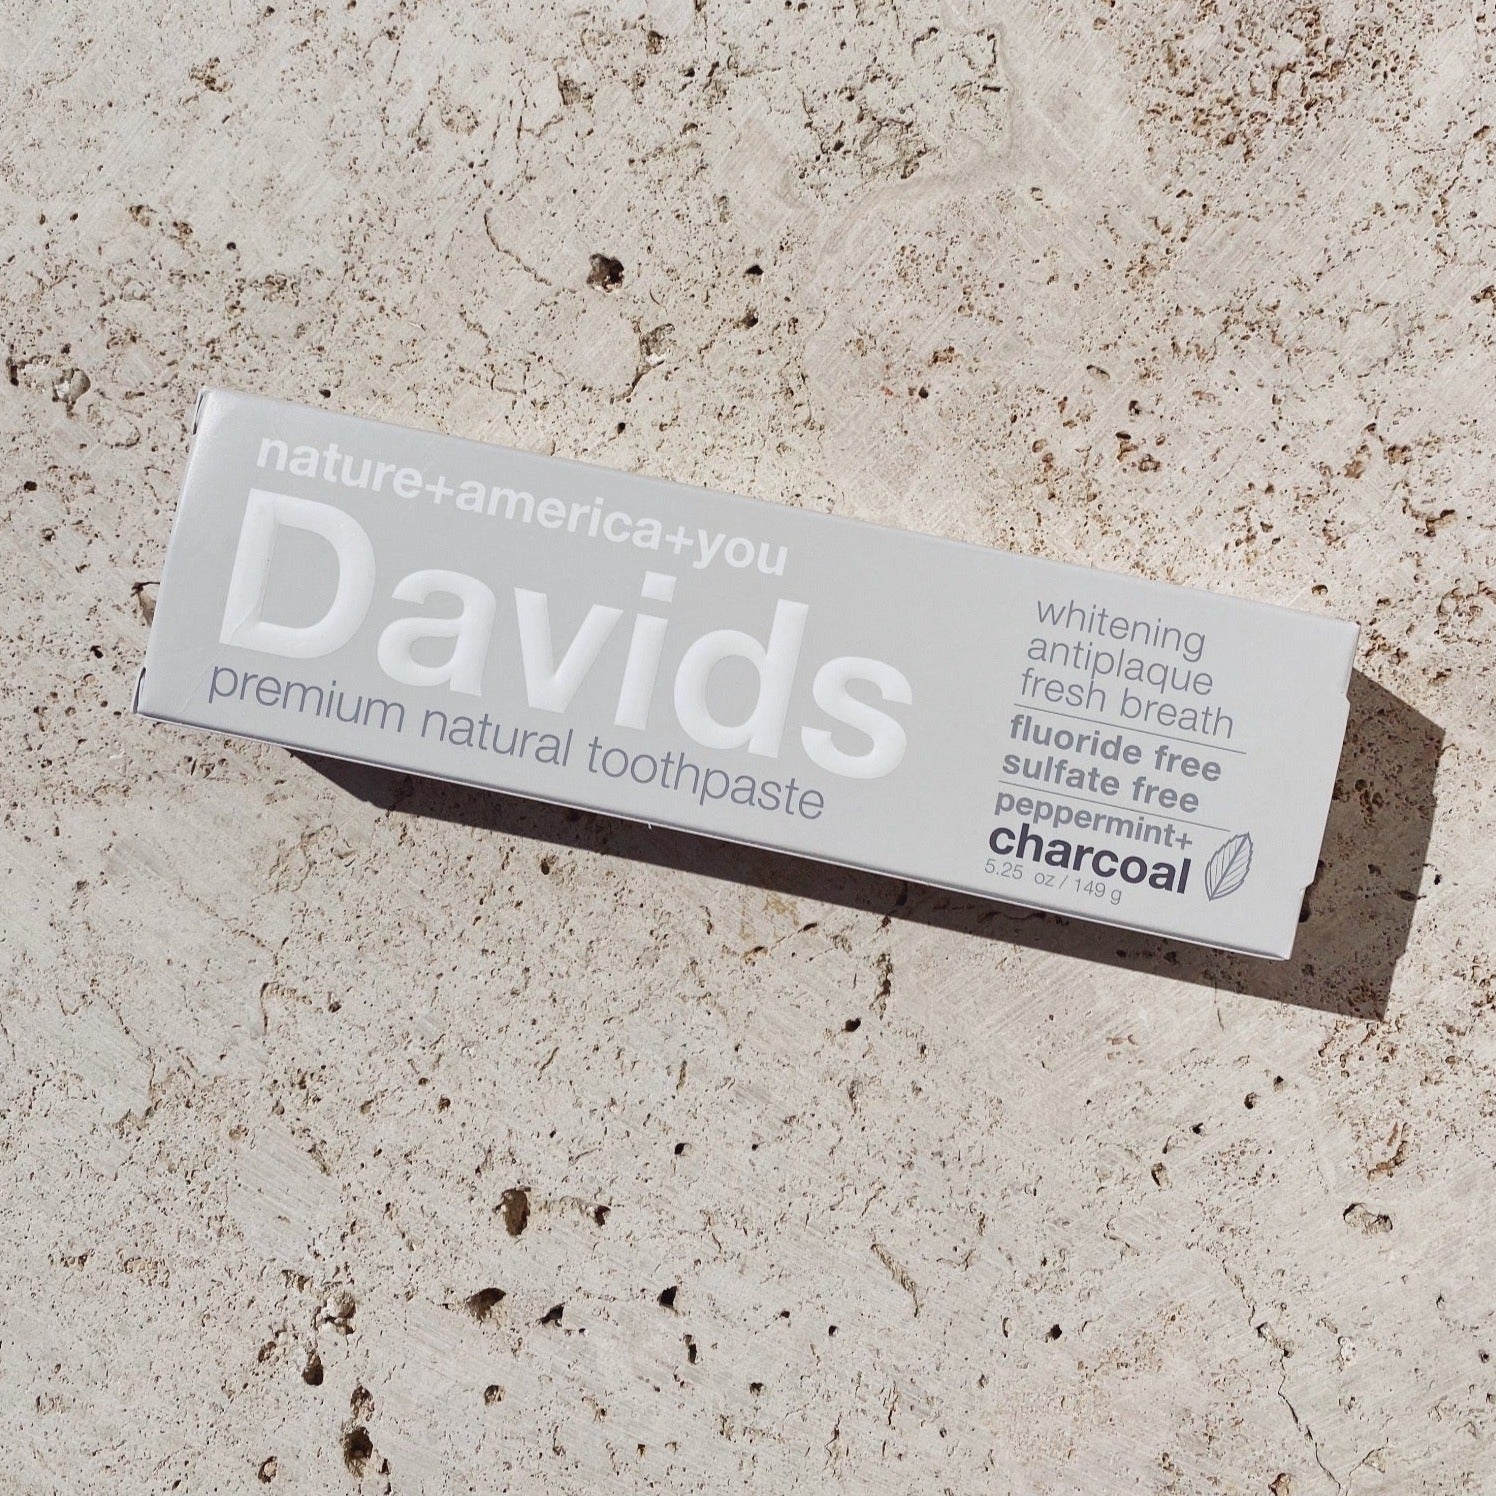 toothpaste by davids natural